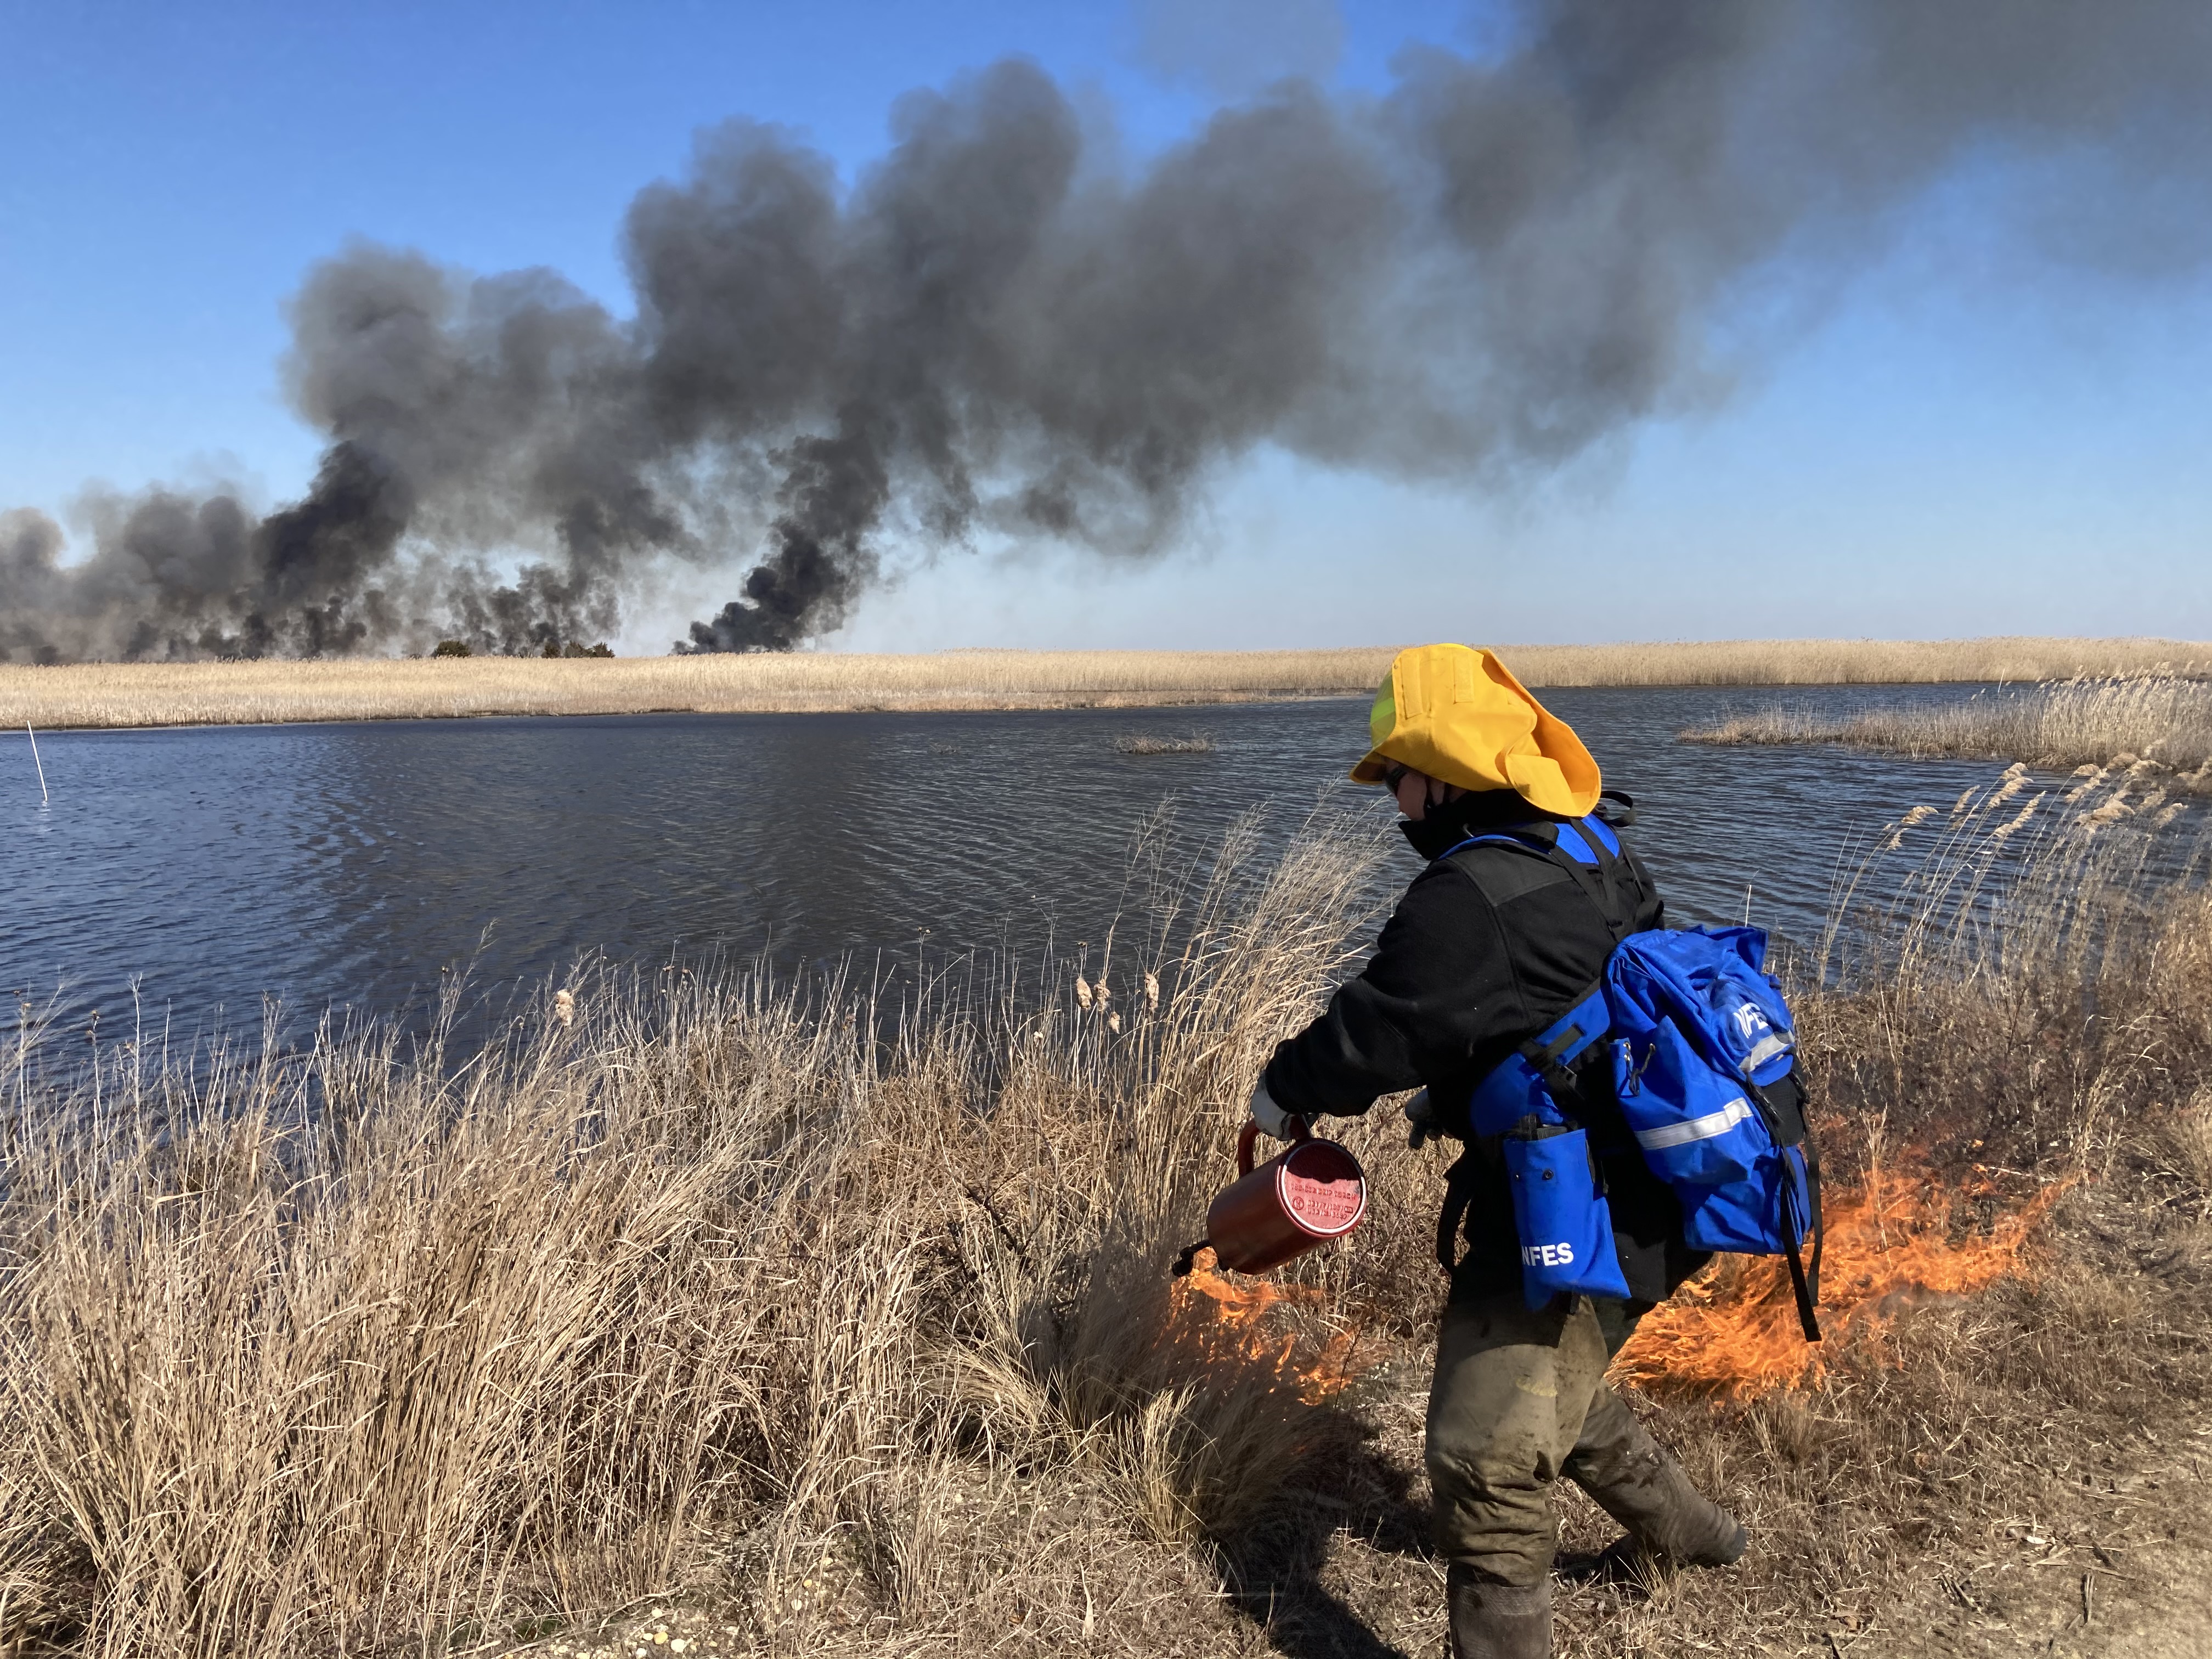 Fire crews set fire to vegetation along the West Pool as part of a prescribed burn at Edwin B. Forsythe NWR